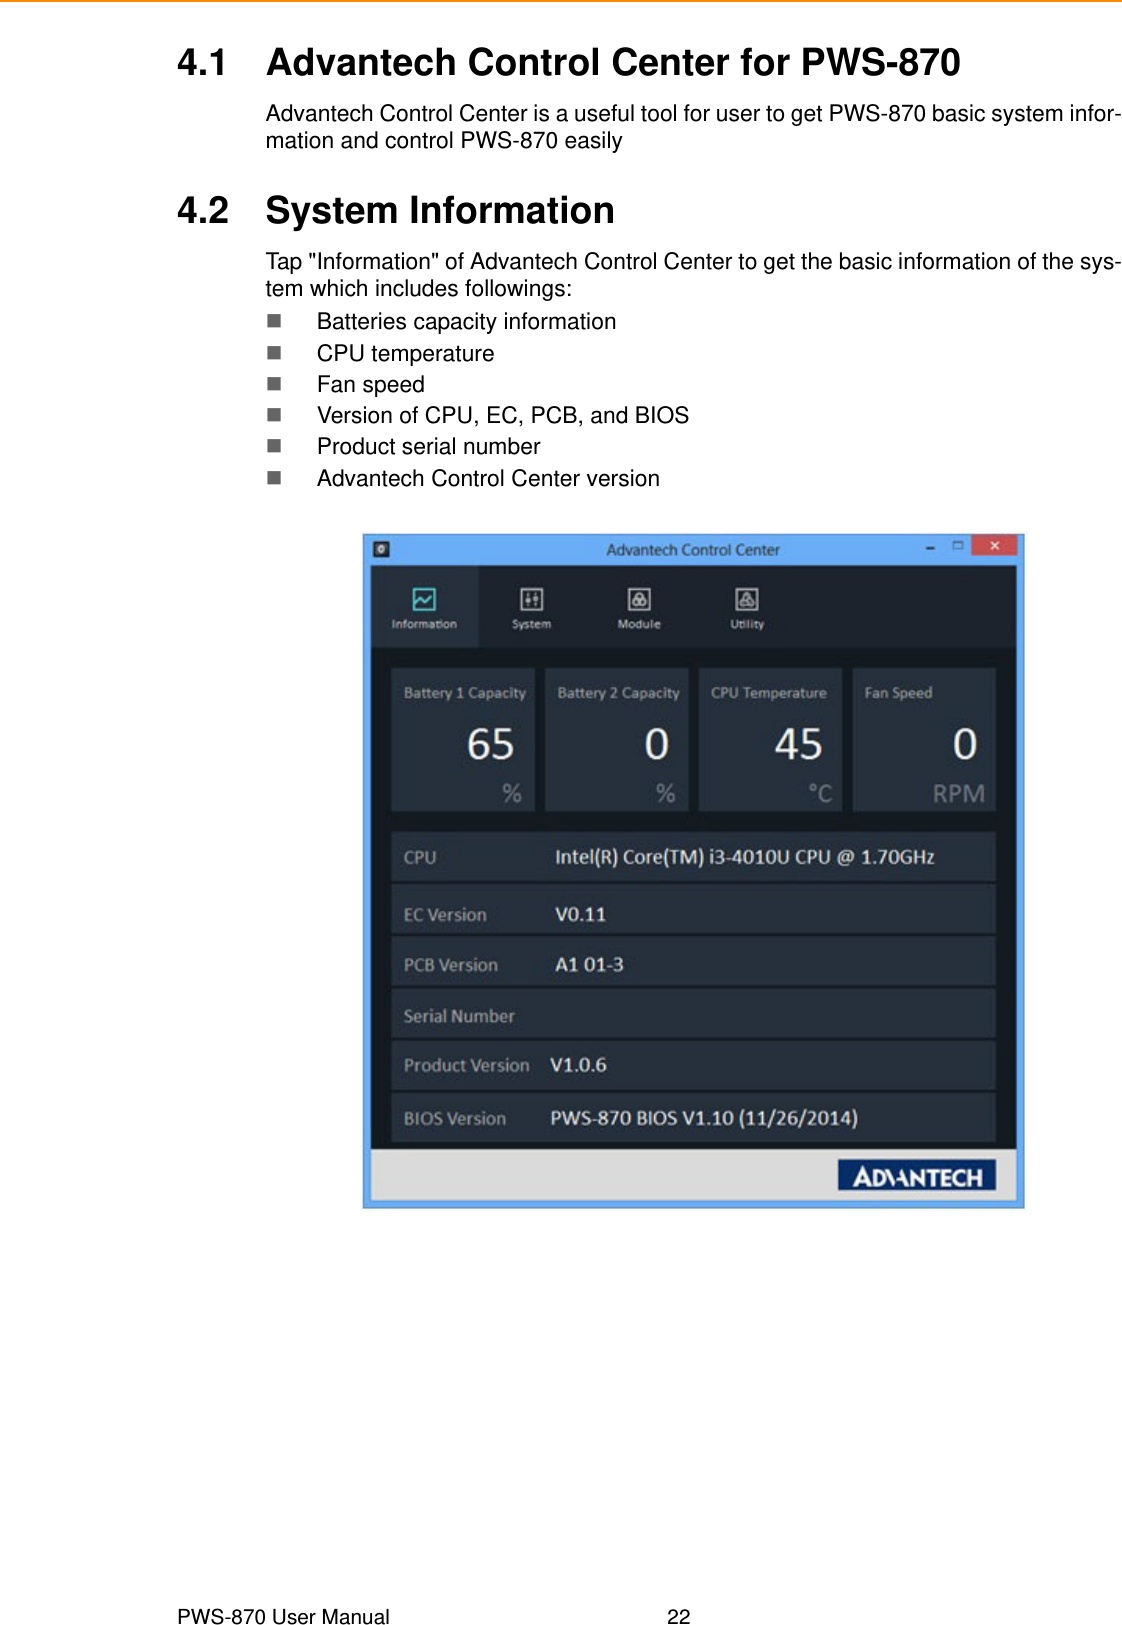 PWS-870 User Manual 224.1 Advantech Control Center for PWS-870Advantech Control Center is a useful tool for user to get PWS-870 basic system infor-mation and control PWS-870 easily4.2 System InformationTap &quot;Information&quot; of Advantech Control Center to get the basic information of the sys-tem which includes followings:Batteries capacity informationCPU temperatureFan speedVersion of CPU, EC, PCB, and BIOSProduct serial numberAdvantech Control Center version